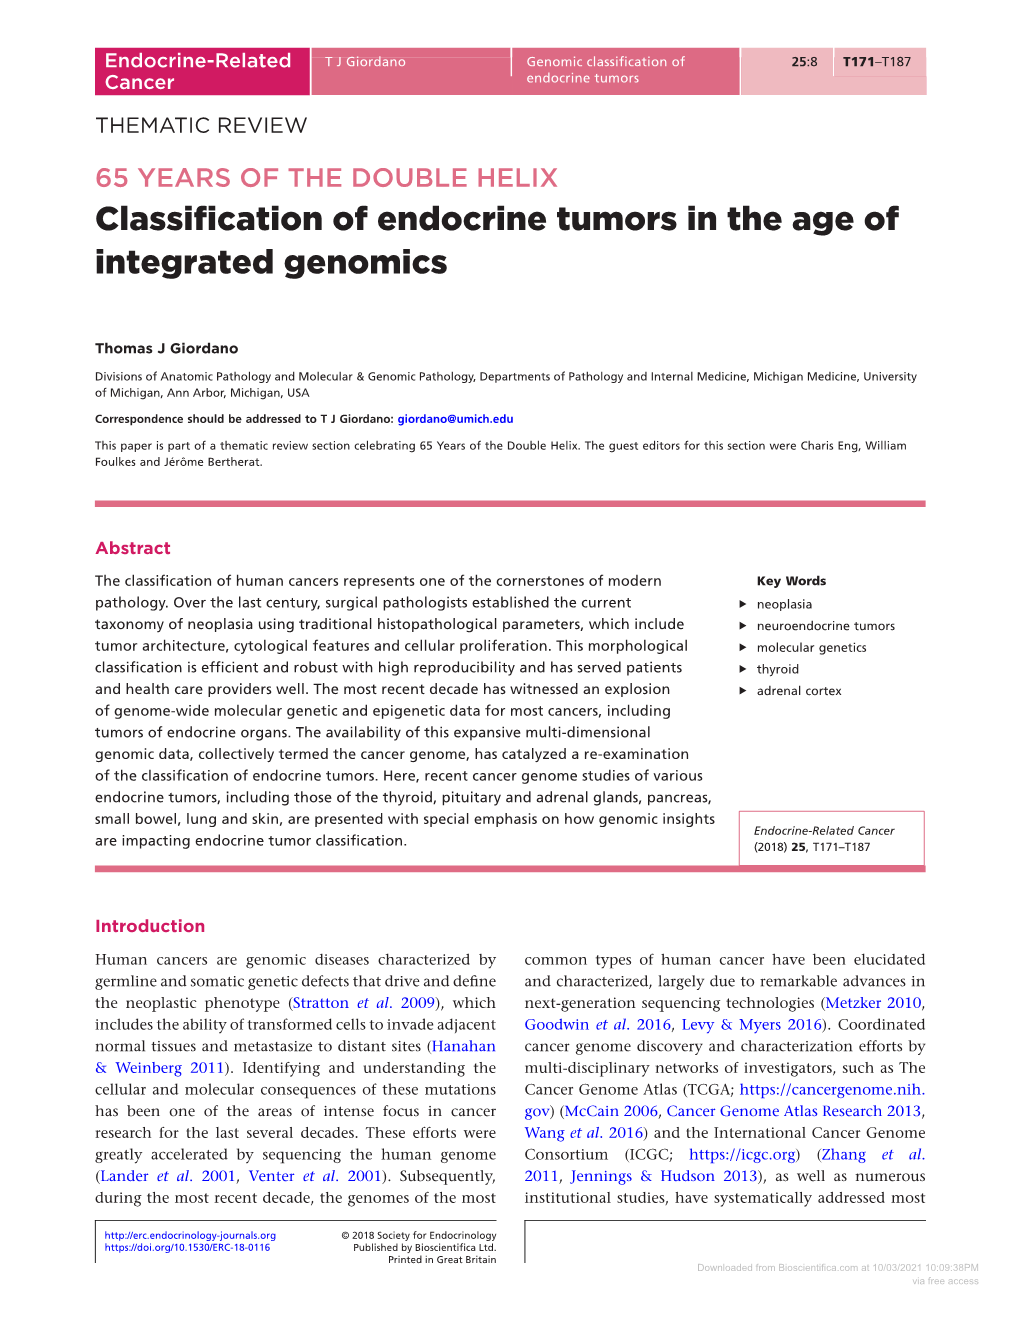 Classification of Endocrine Tumors in the Age of Integrated Genomics